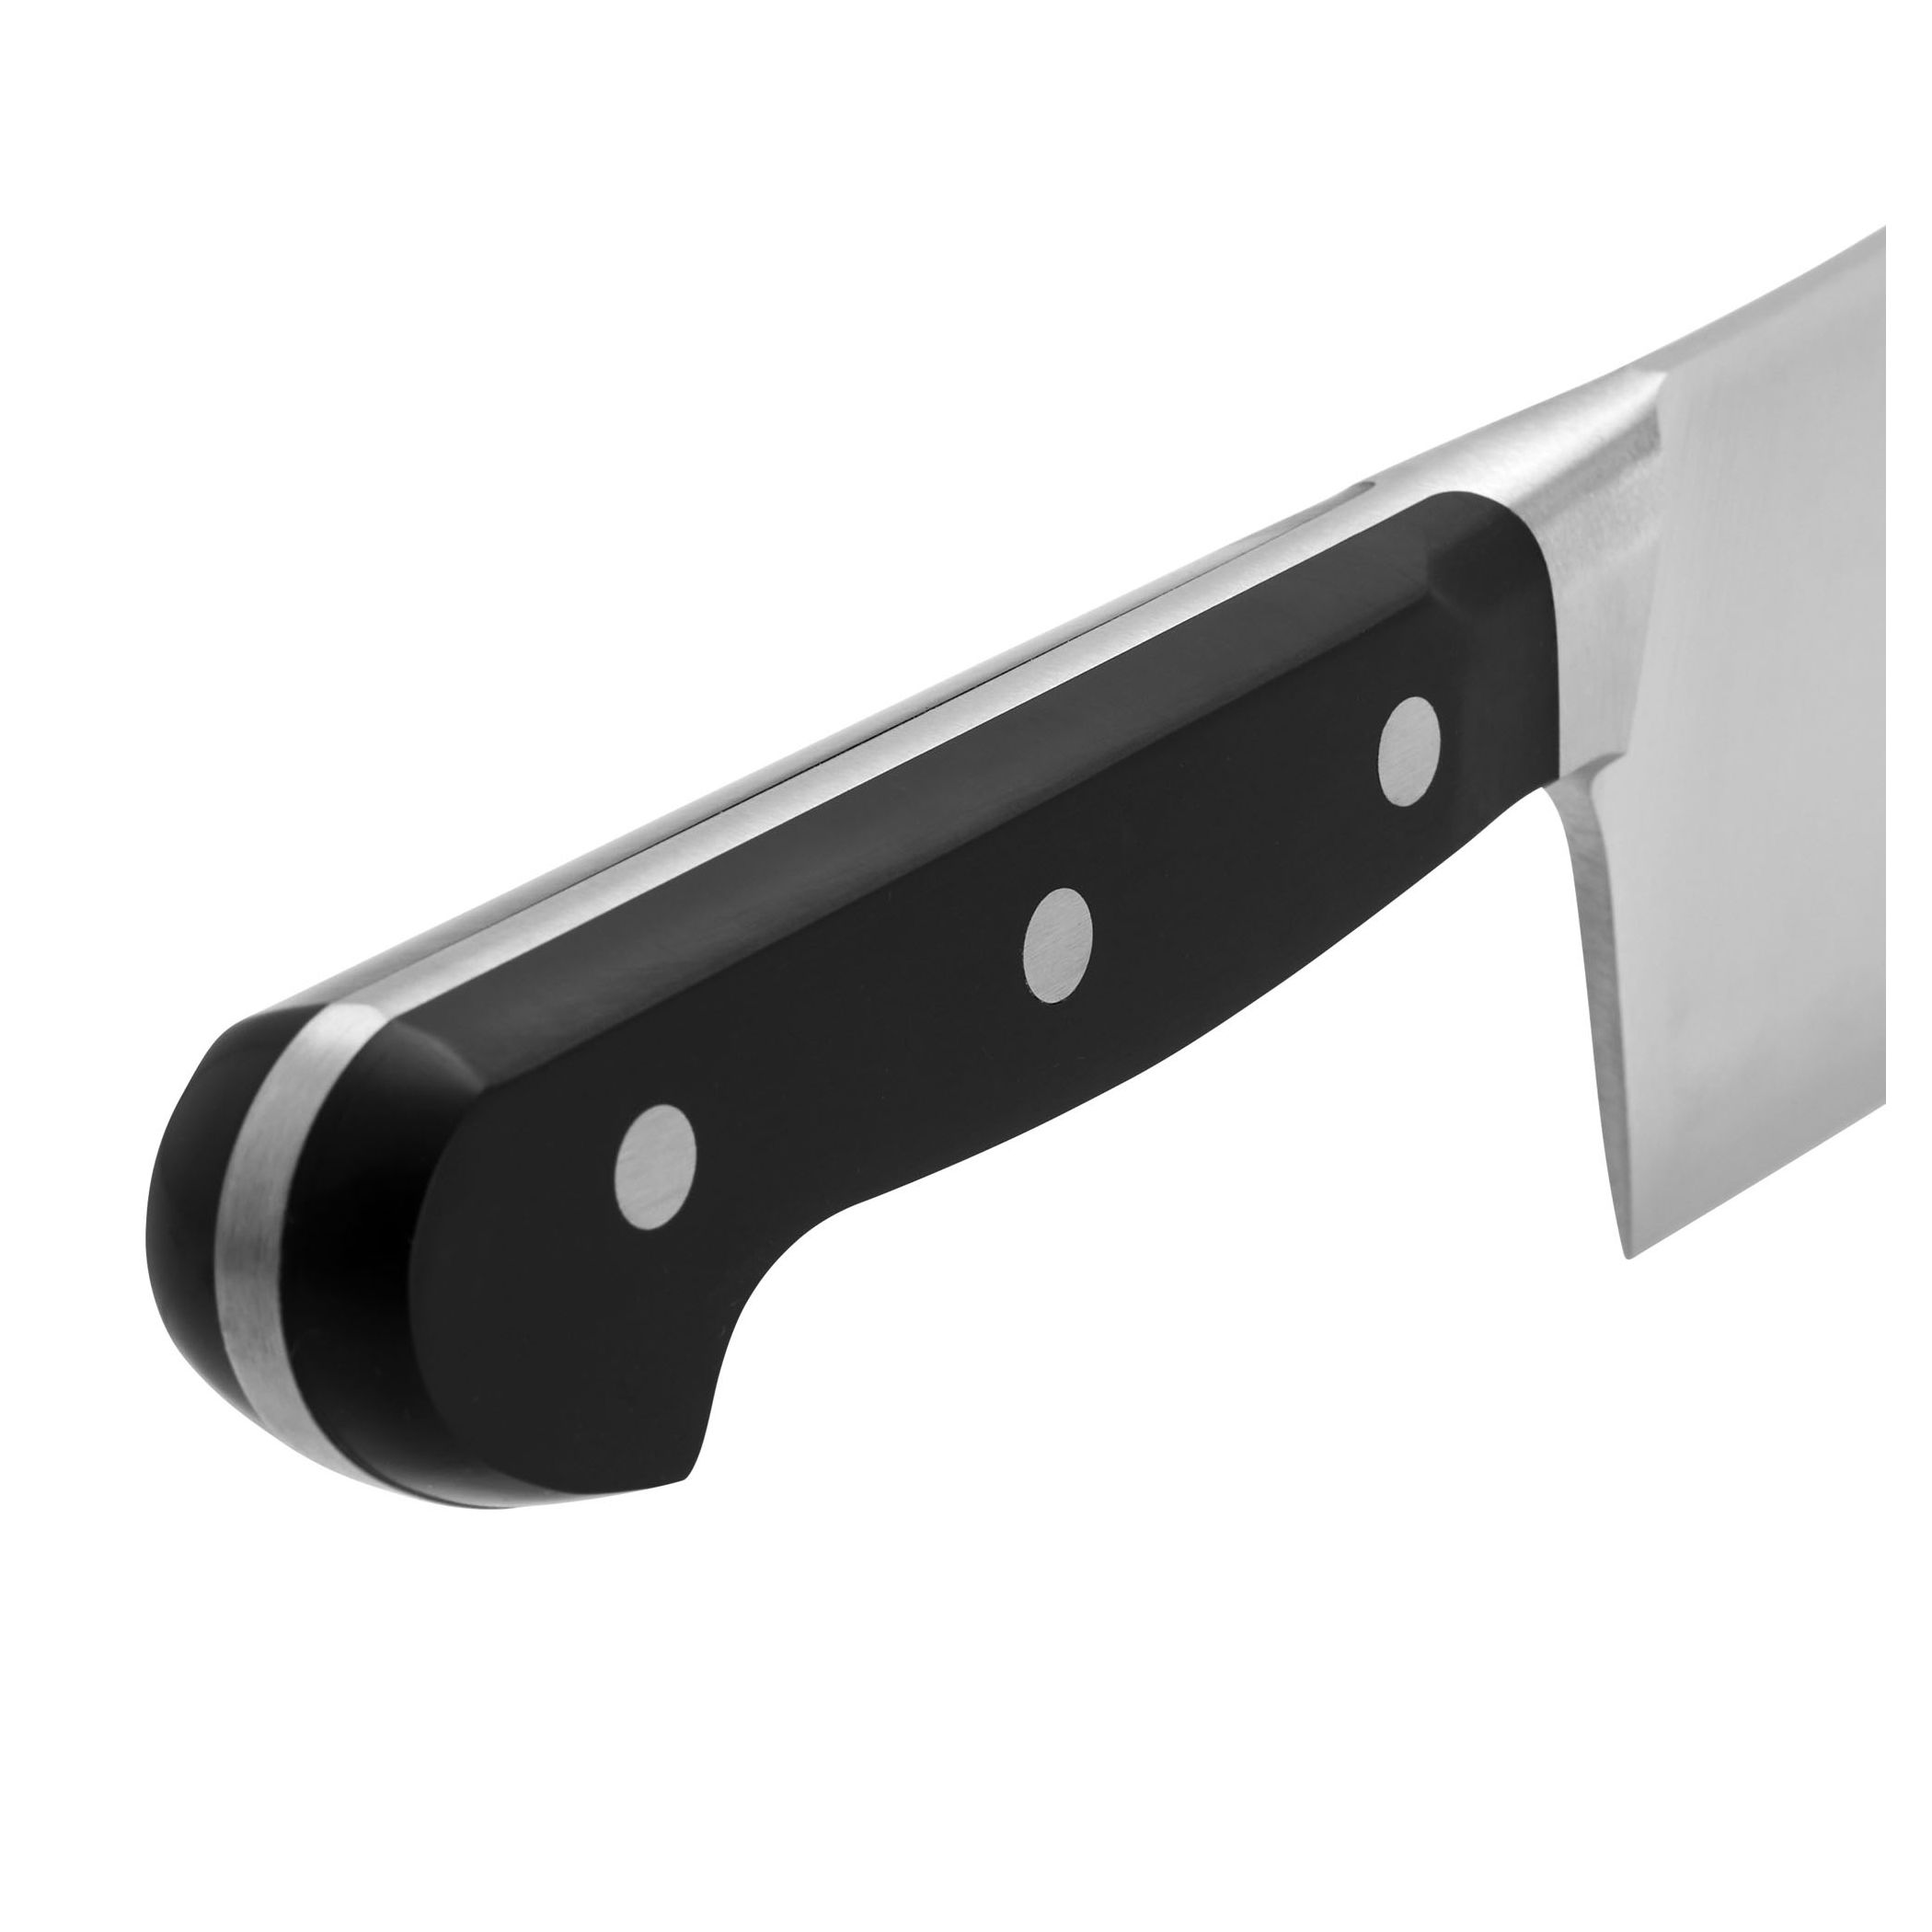 https://www.zwilling.com/on/demandware.static/-/Sites-zwilling-master-catalog/default/dw01a707f7/images/large/38415-163_04.jpg